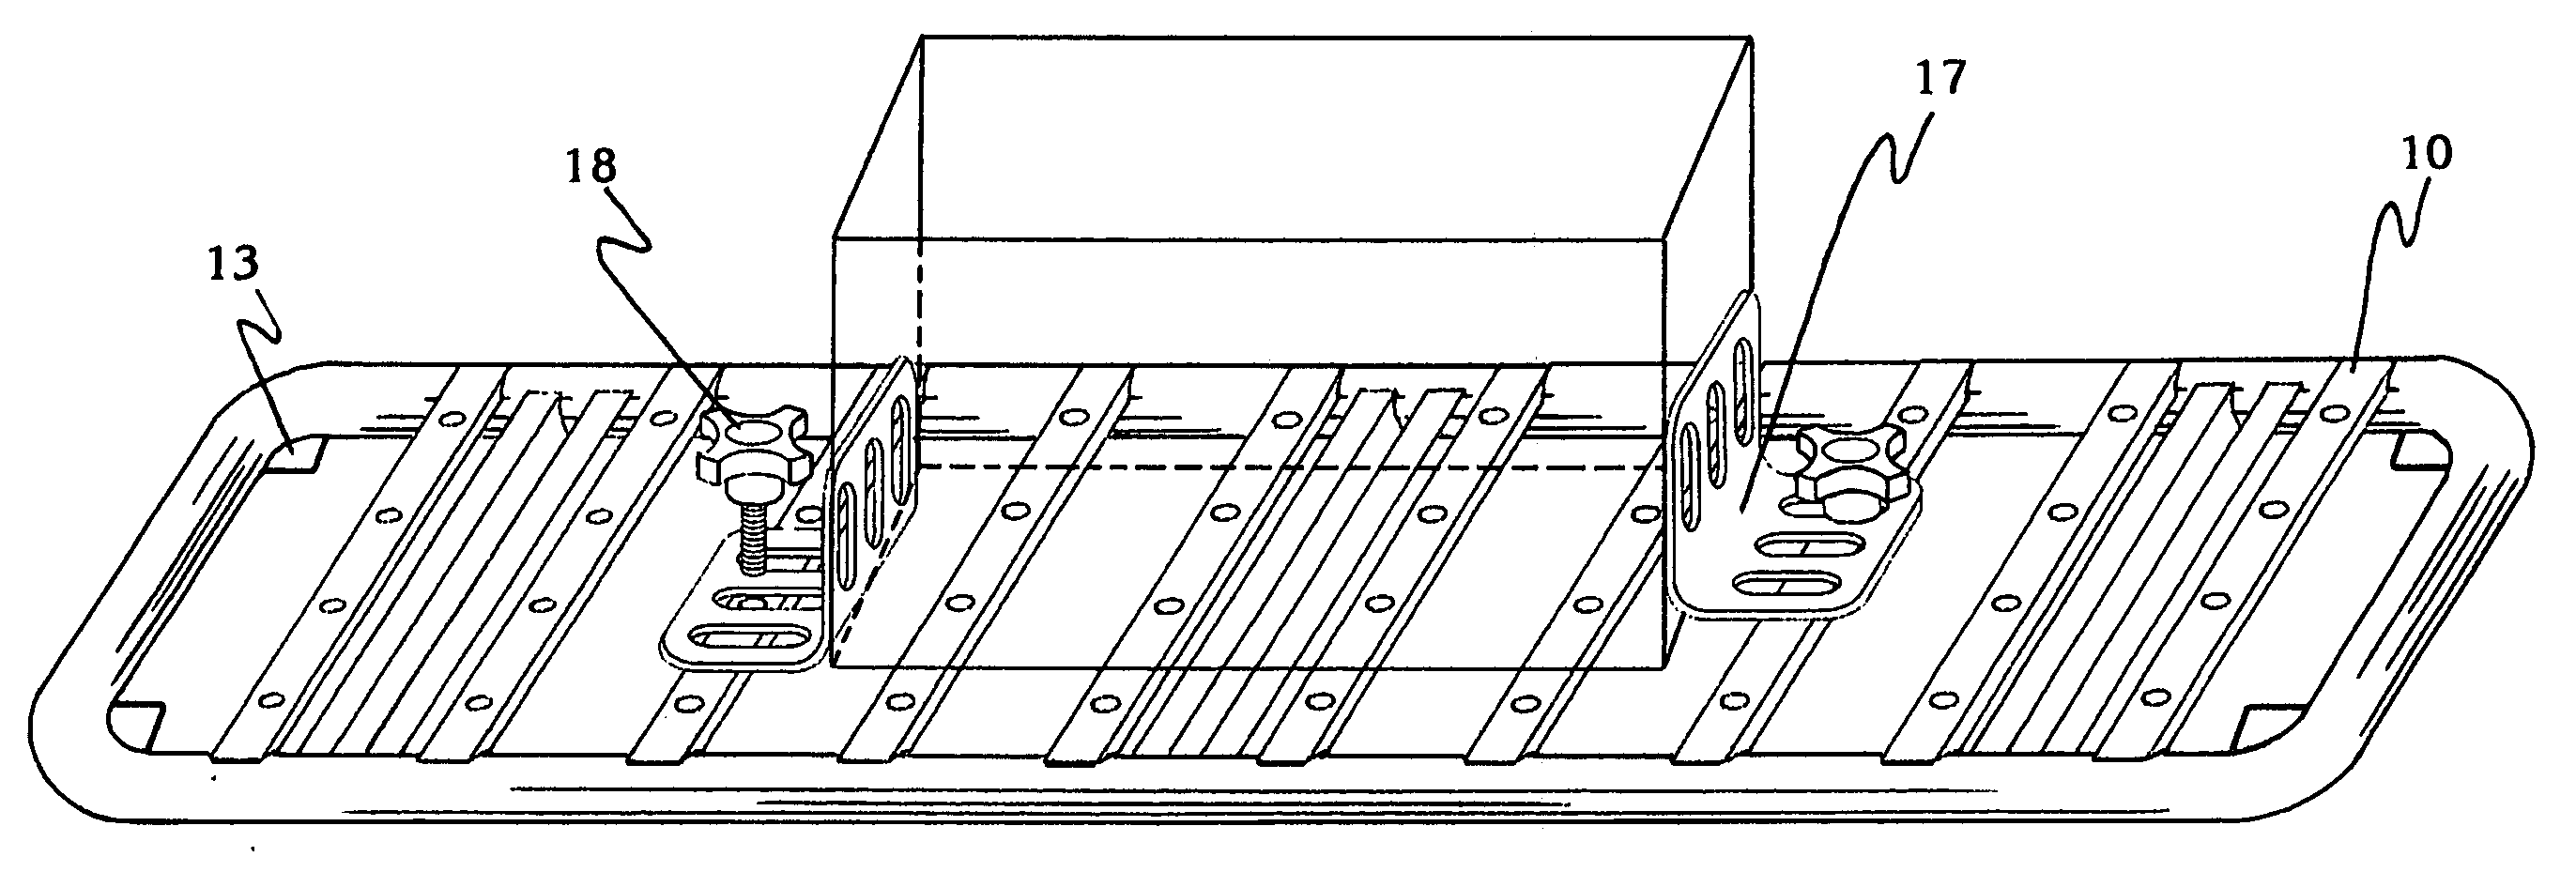 Vehicle carrier rack utilizing a grid system for mounting accessories and load blocks